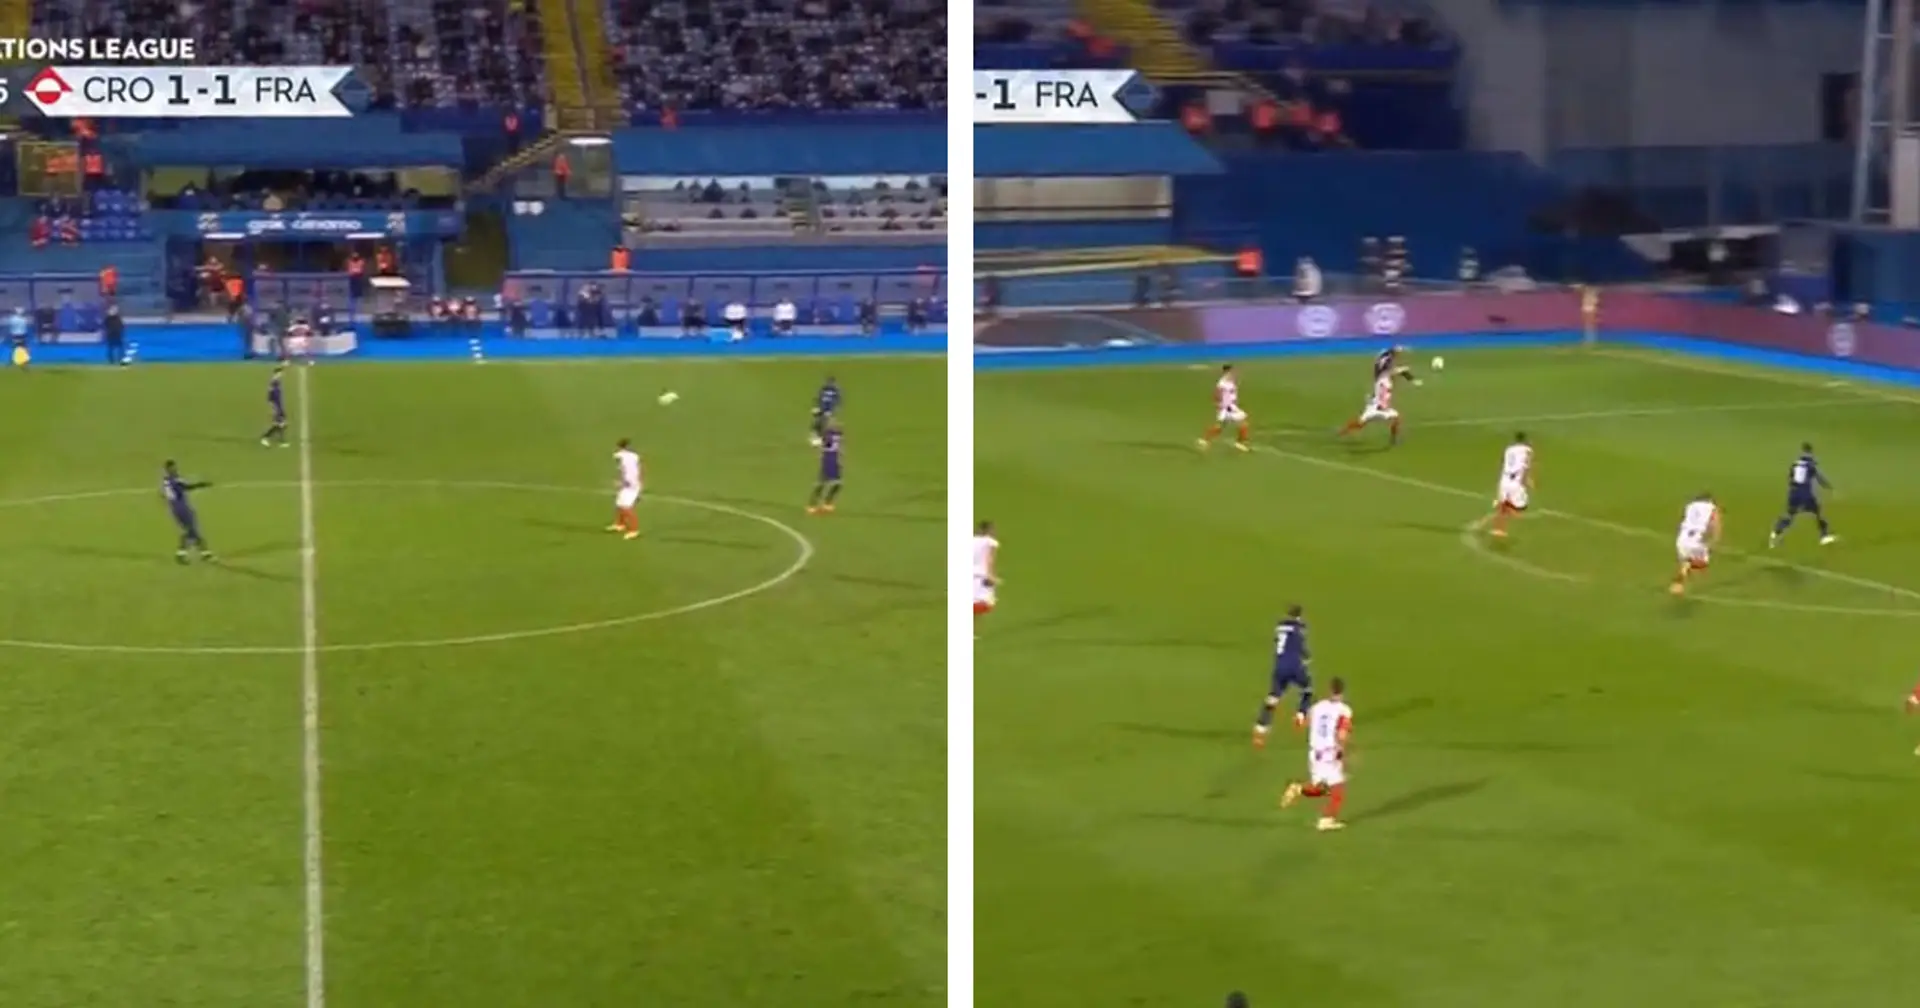 Pogba produces glorious pass to create Mbappe’s goal for France – and fans debate why he can’t produce same for United